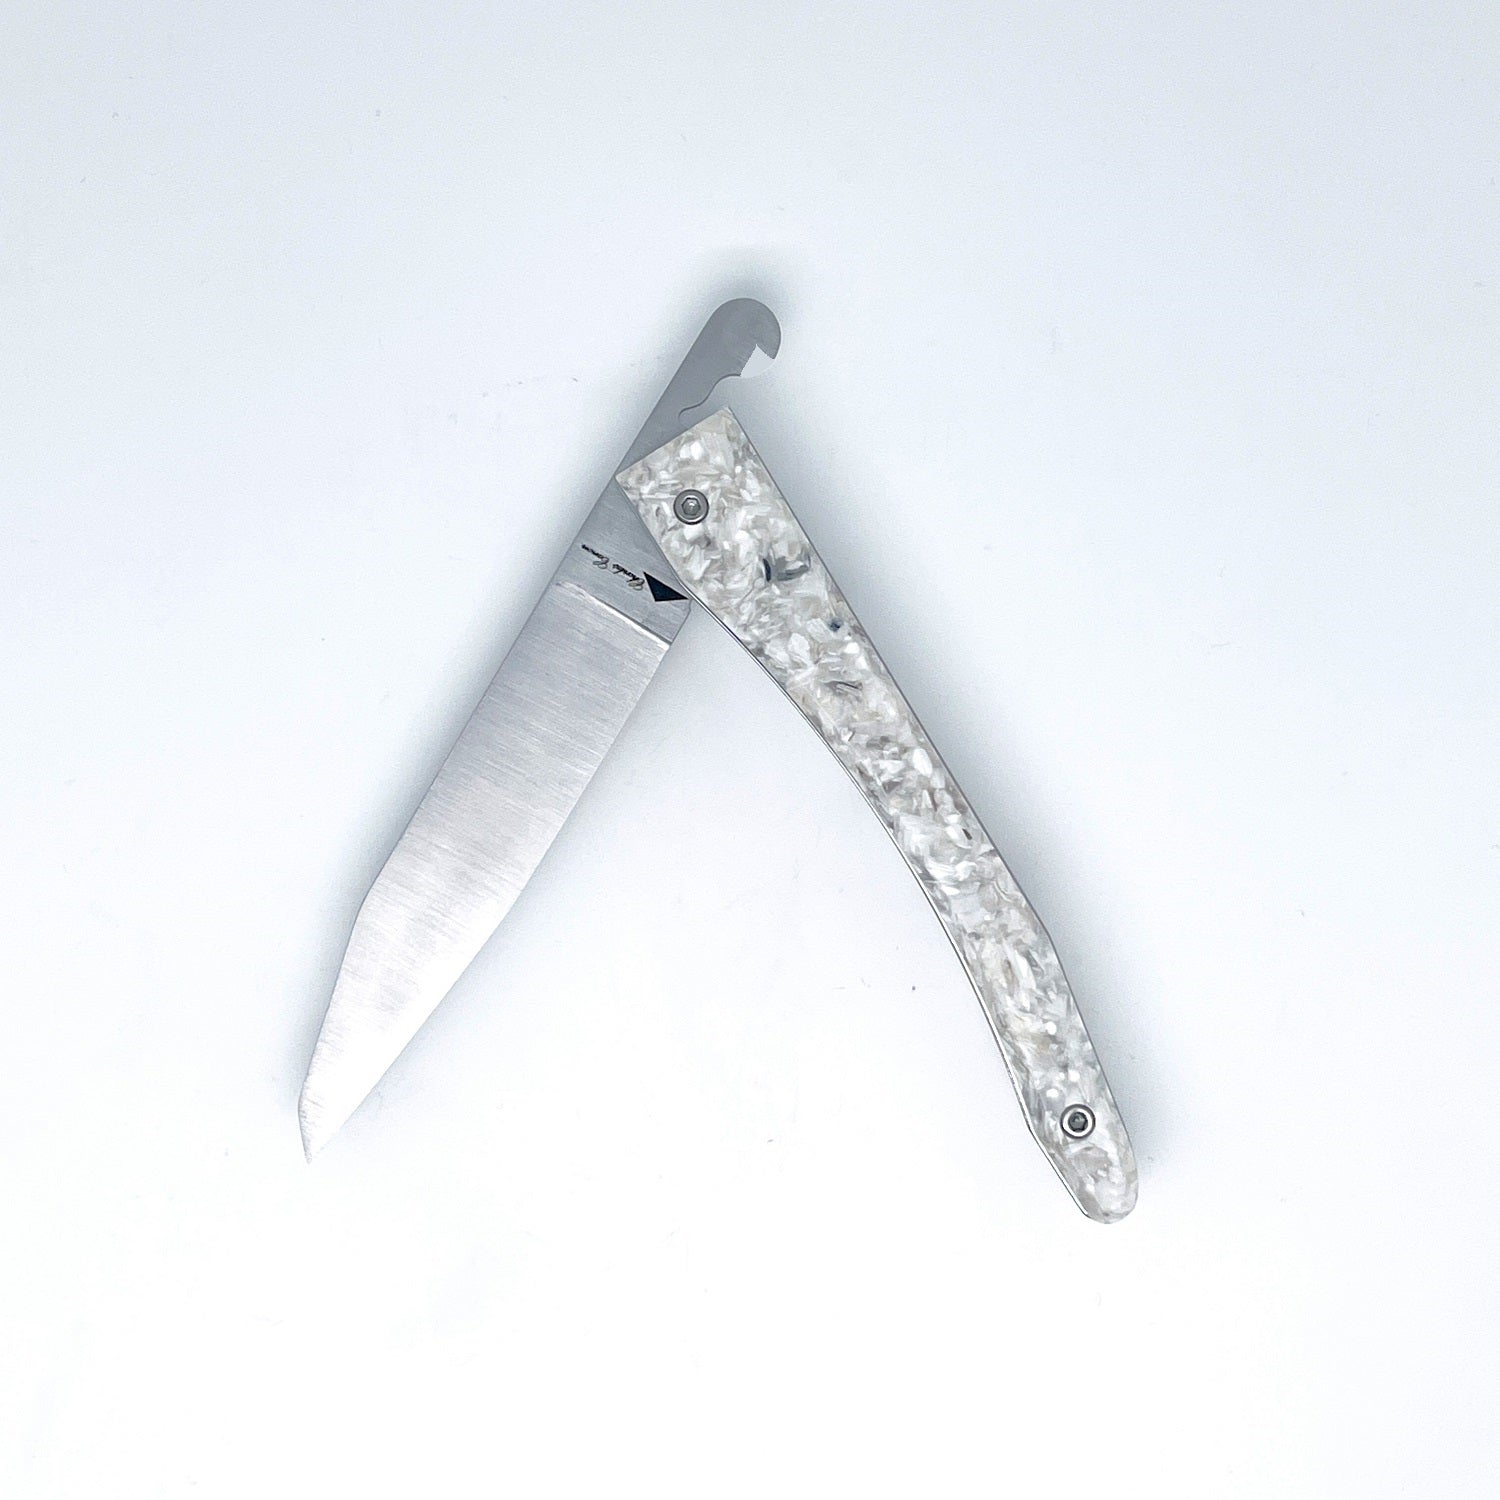 Piedmontese knife with oyster shell handle